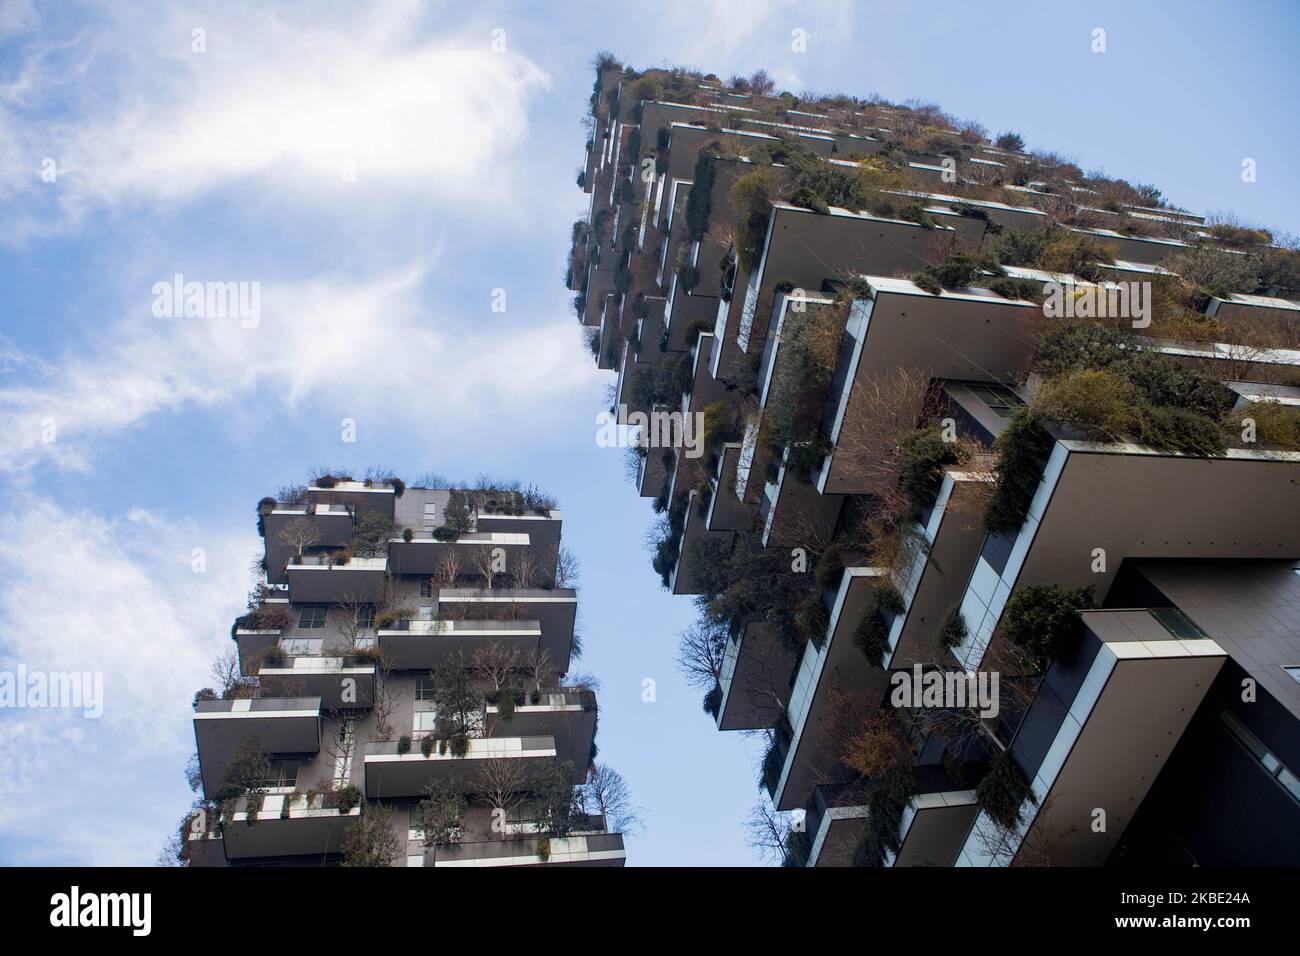 General view of Bosco Verticale (Vertical Forest) in Milan, Italy, on  January 07 2020. Bosco Verticale is a pair of residential towers in the  Porta Nuova district of Milan, Italy, between Via